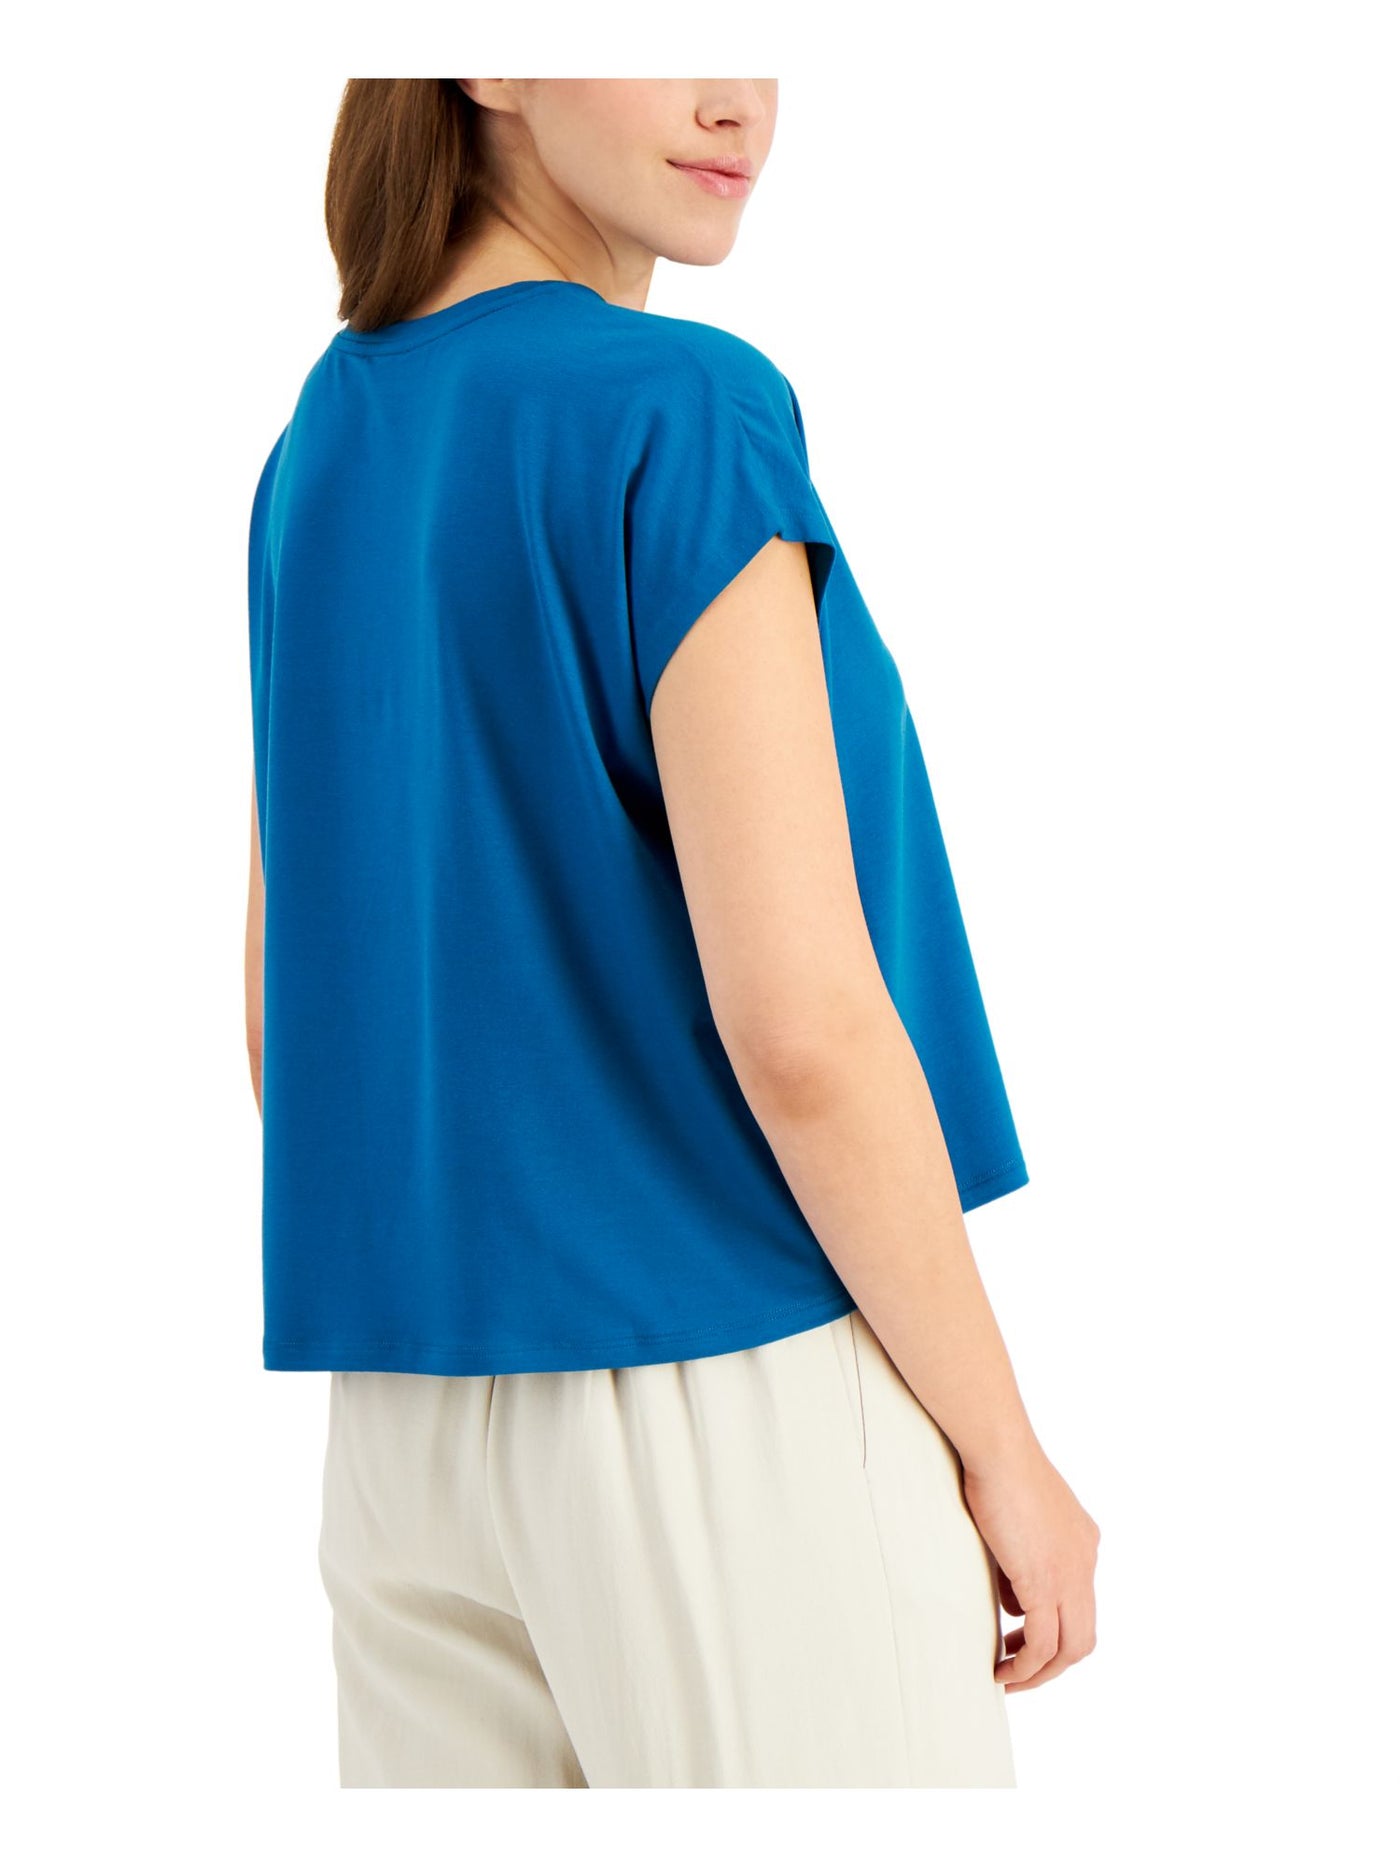 EILEEN FISHER Womens Turquoise Stretch Short Sleeve Crew Neck Top M